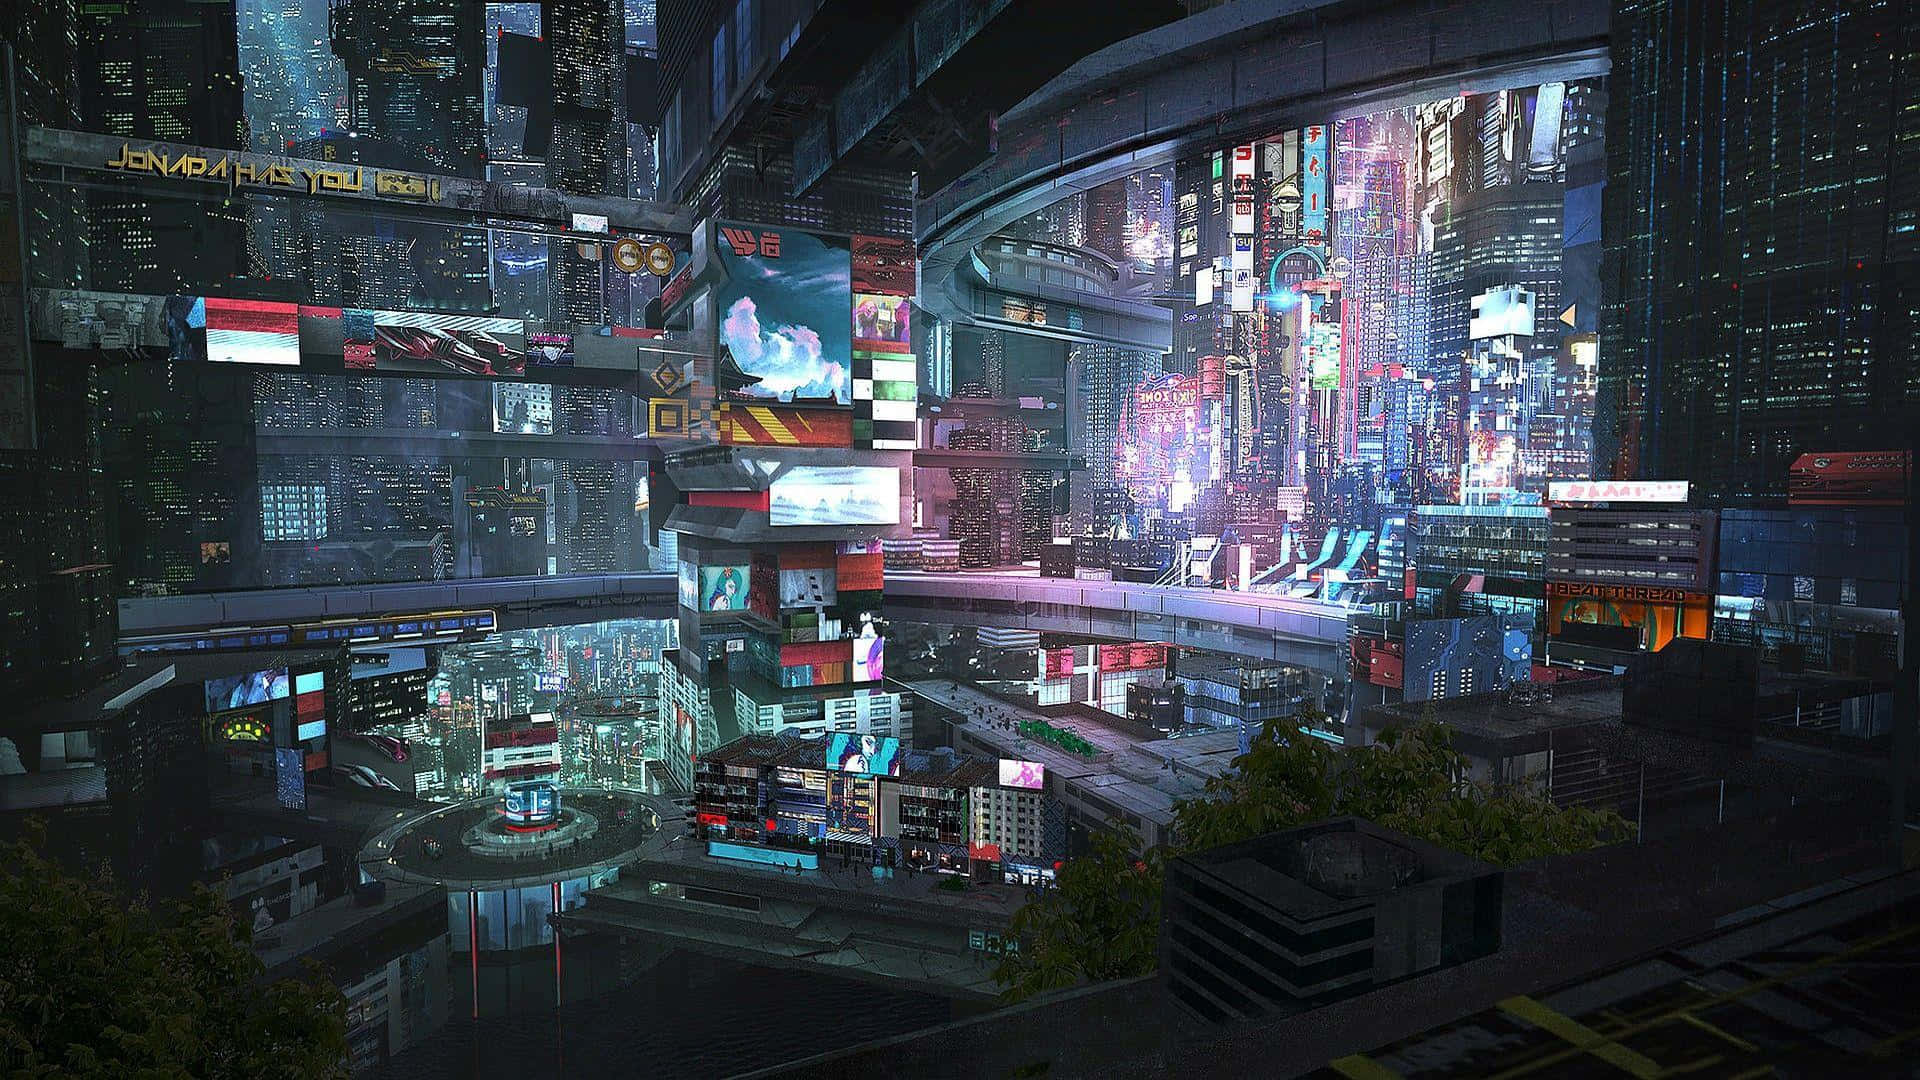 Welcome to the Cyberpunk City